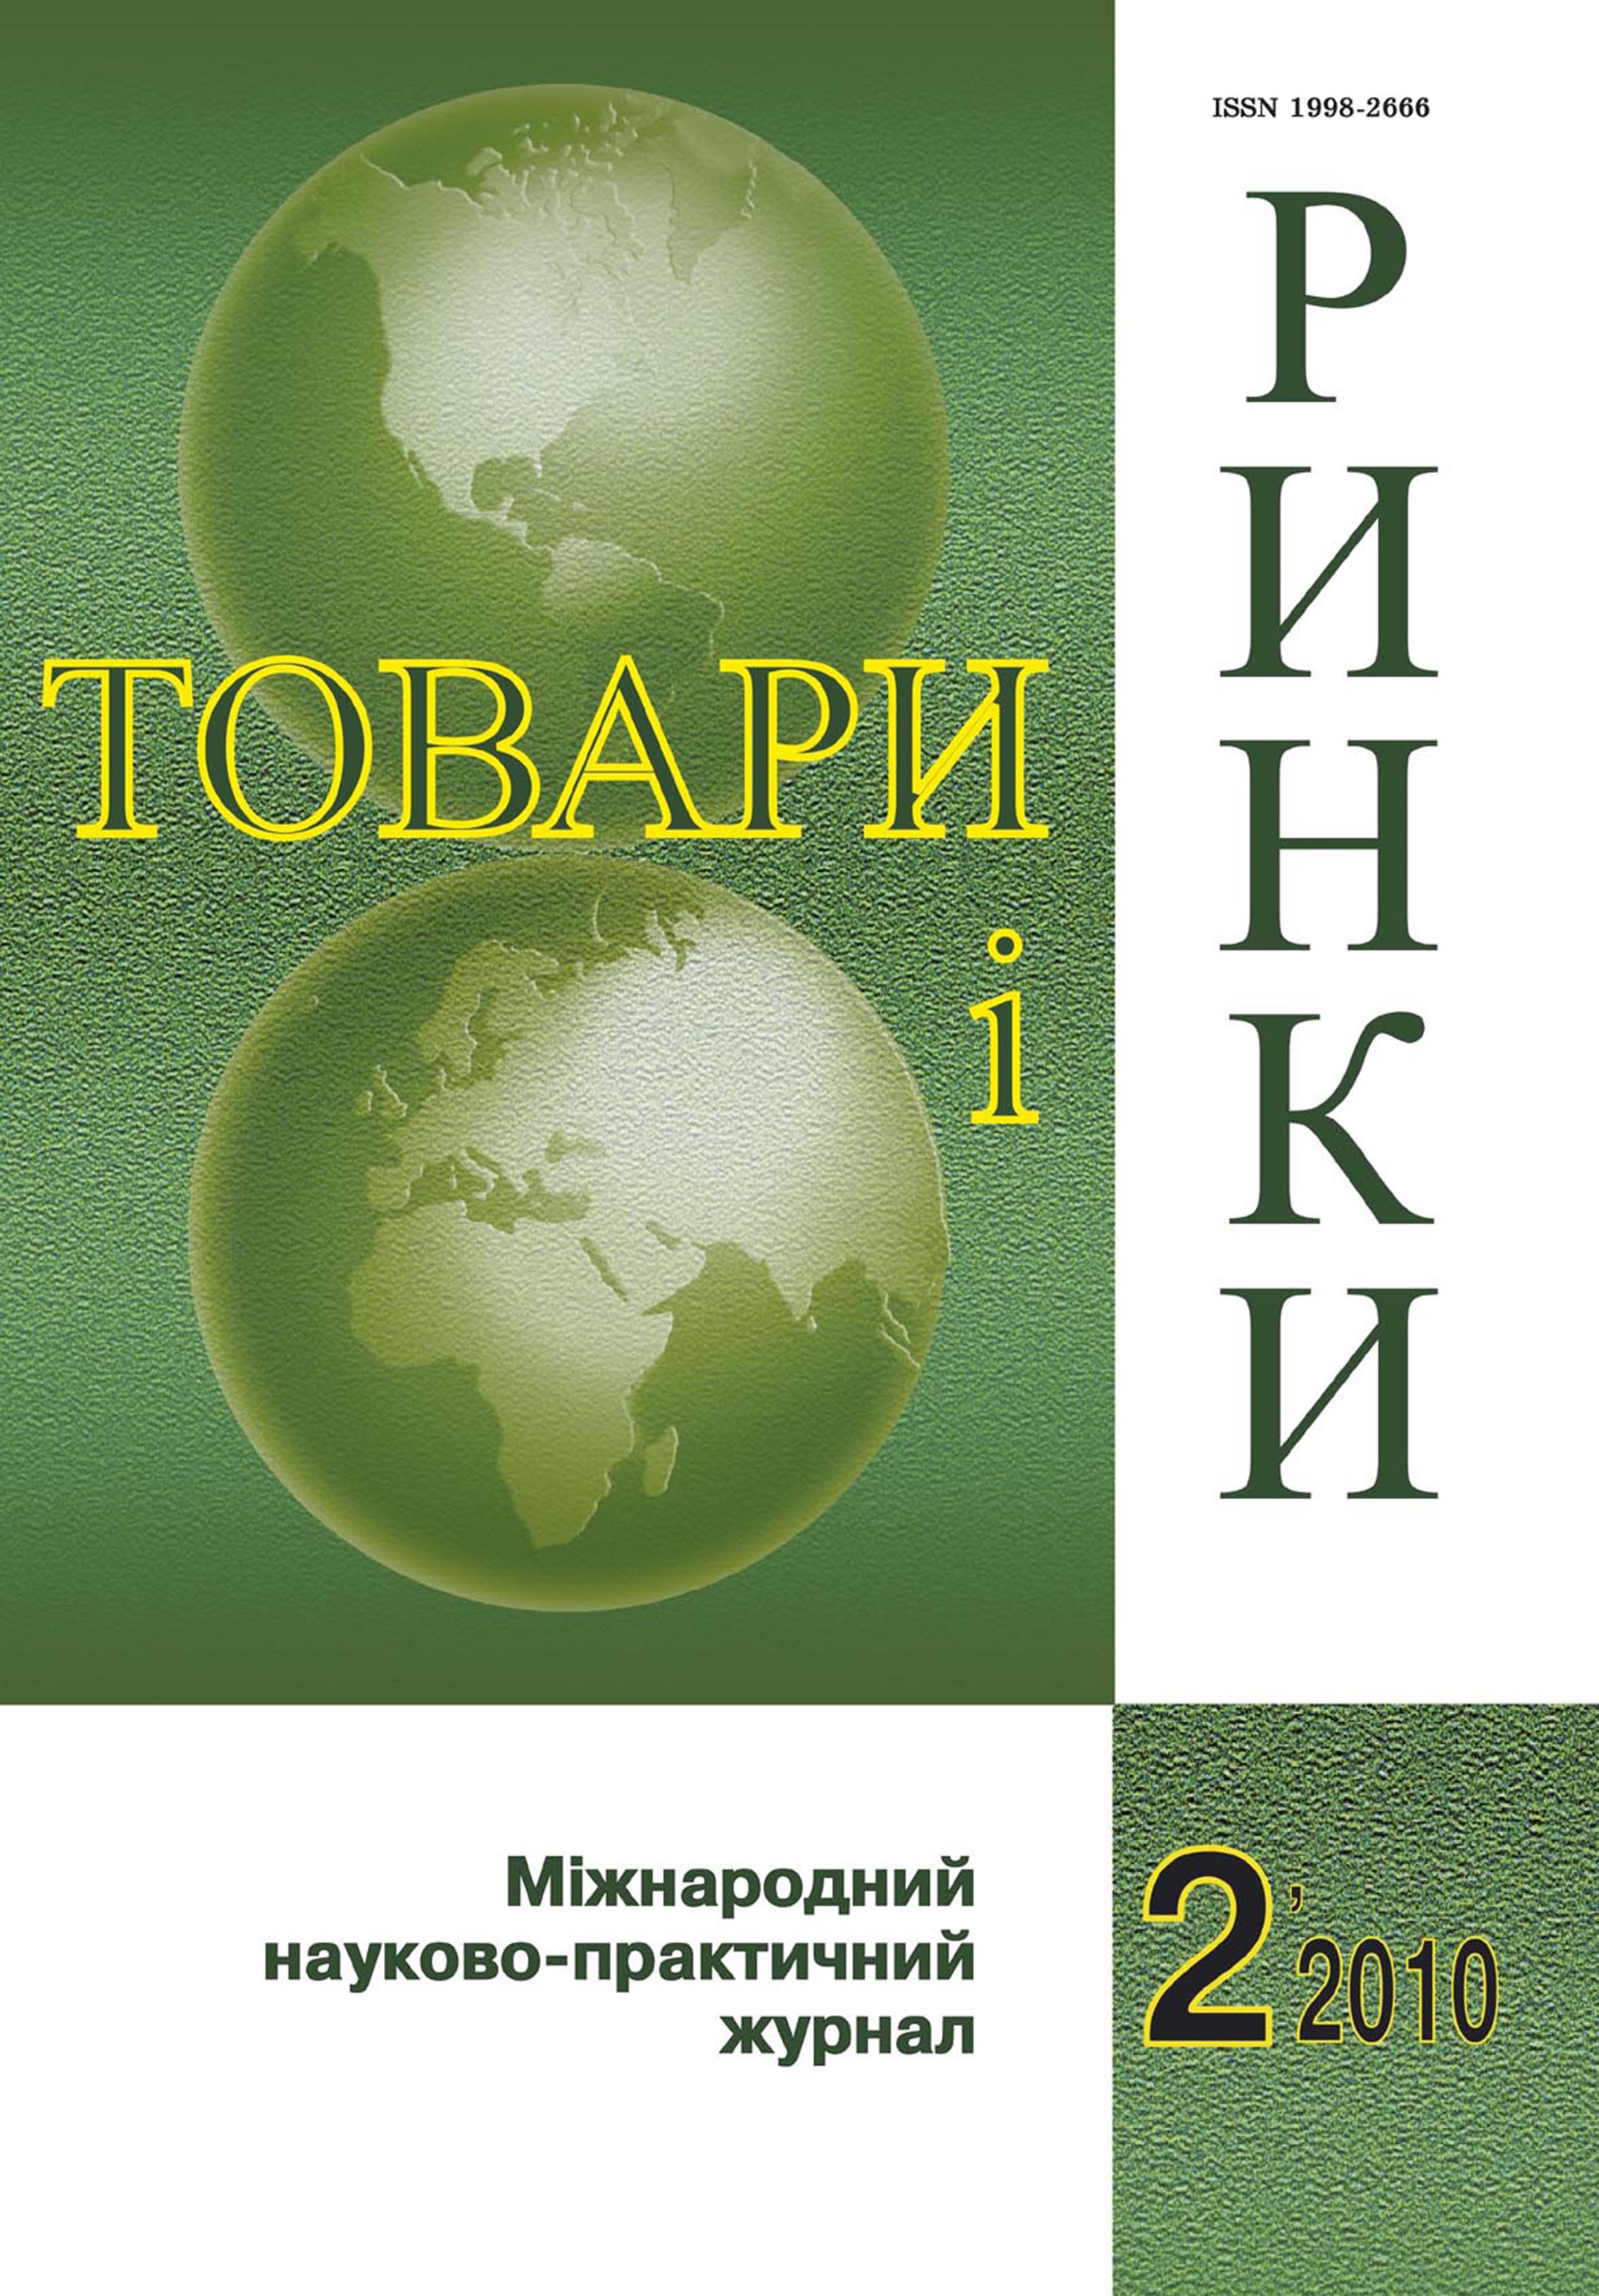 					View Vol. 10 No. 2 (2010): Technical and Economic Science
				